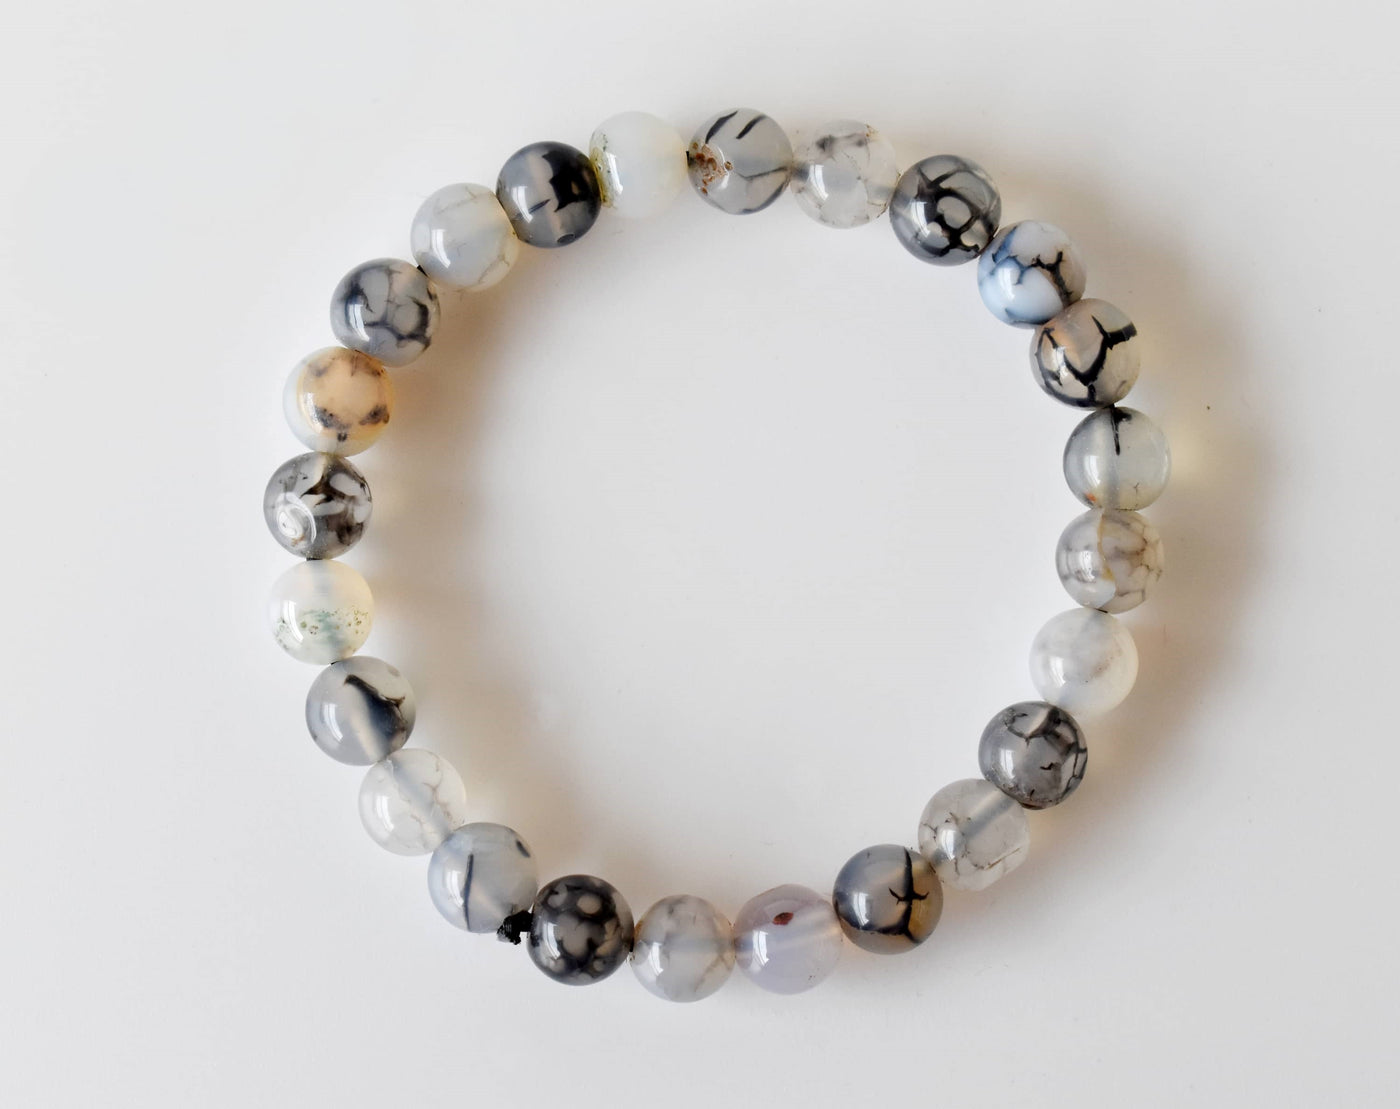 Dragon Vein Agate Bracelet (Courage and Self-Confidence)